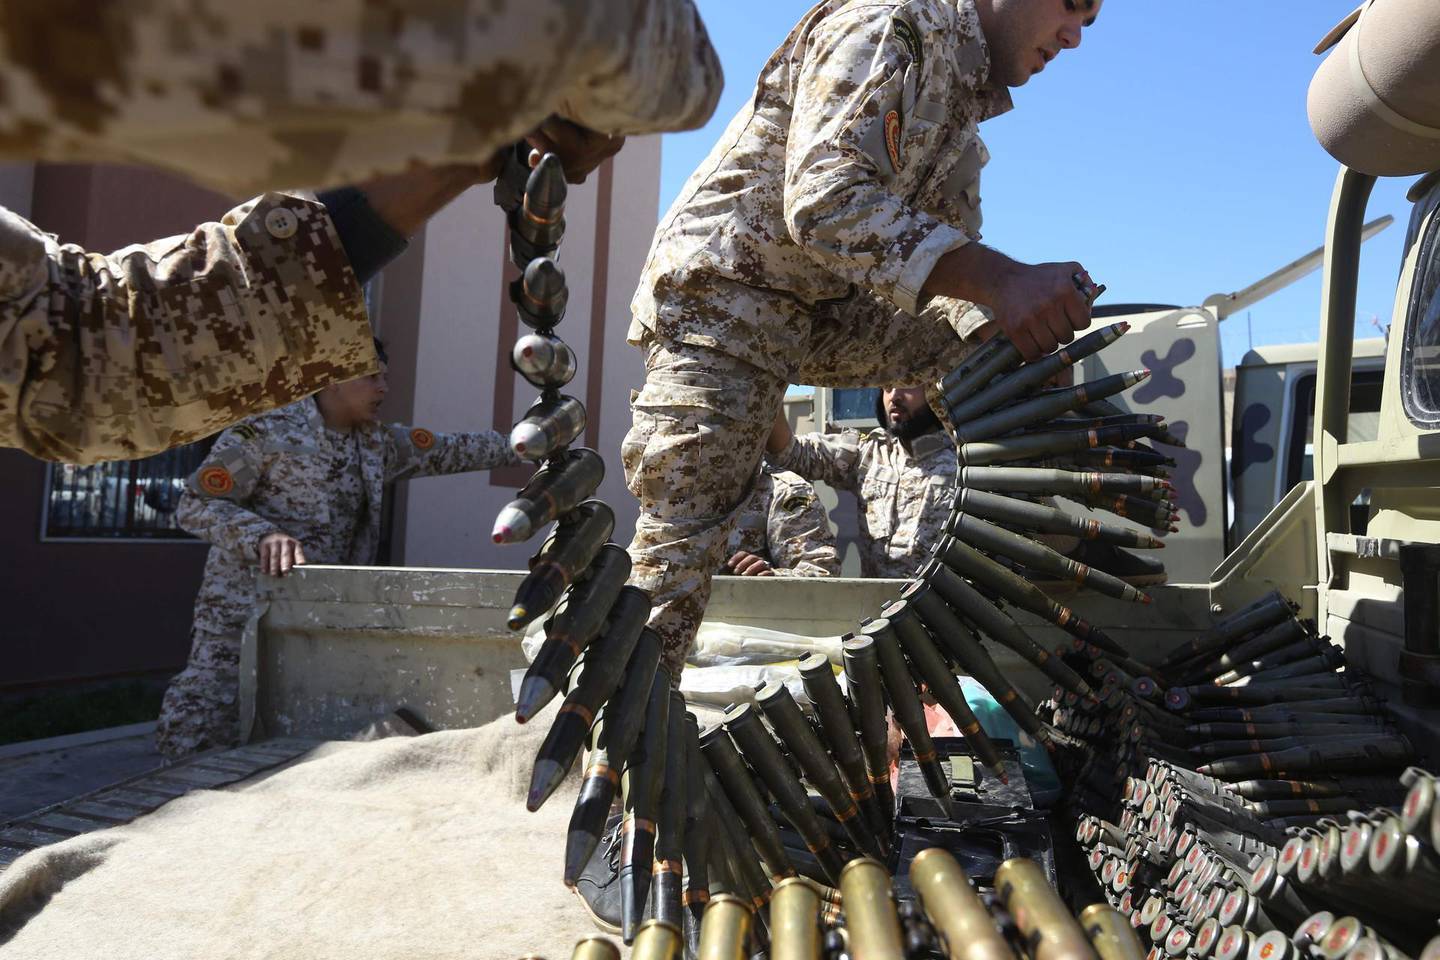 (FILES) In this file photo taken on April 08, 2019, fighters from a Misrata armed group loyal to the internationally recognised Libyan Government of National Accord (GNA) prepare their ammunition before heading to the frontline as battles against Forces of Libyan strongman Khalifa Haftar, in Tripoli The US charged on July 16, 2020, that the EU's Operation Irini to enforce a UN embargo on sending weapons to war-torn Libya lacked seriousness, sharing Turkey's criticism that the effort is biased. / AFP / Mahmud TURKIA
